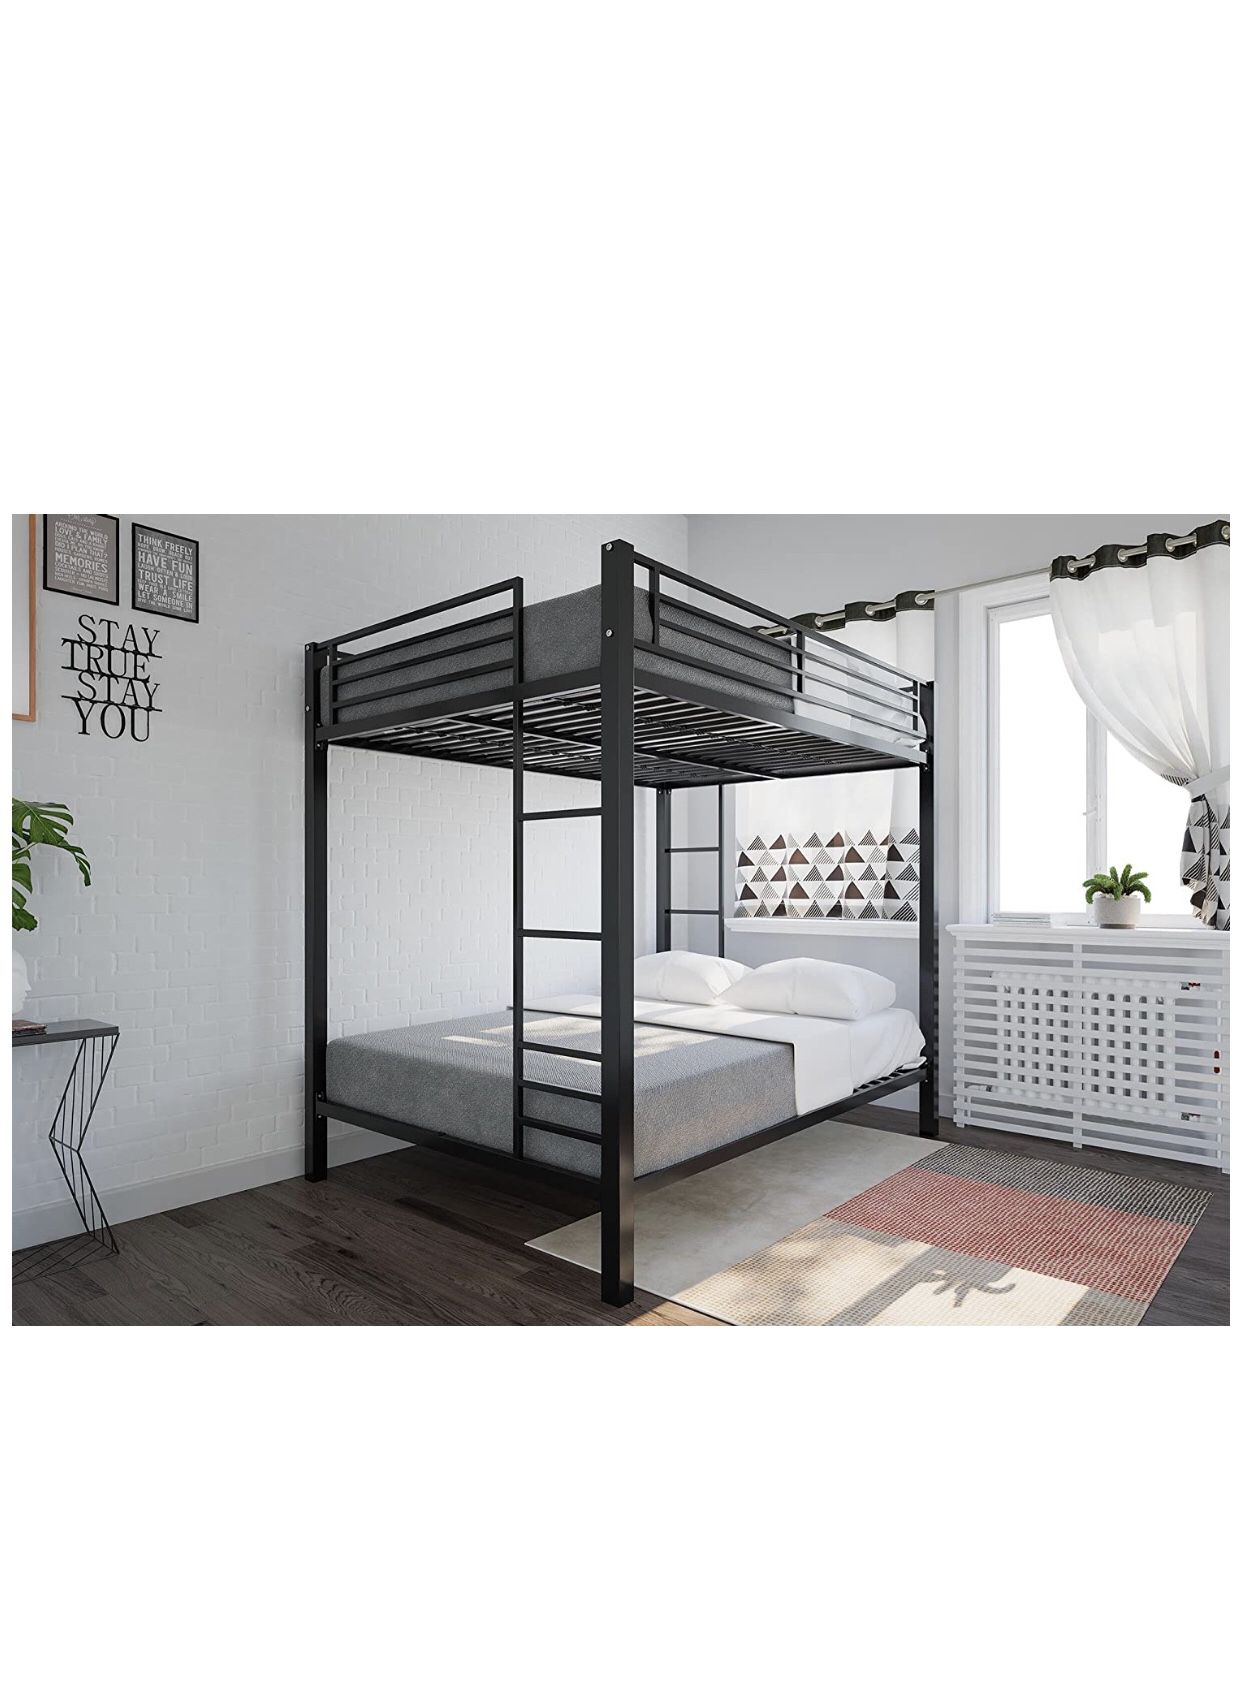 Bunk Bed with delivery included